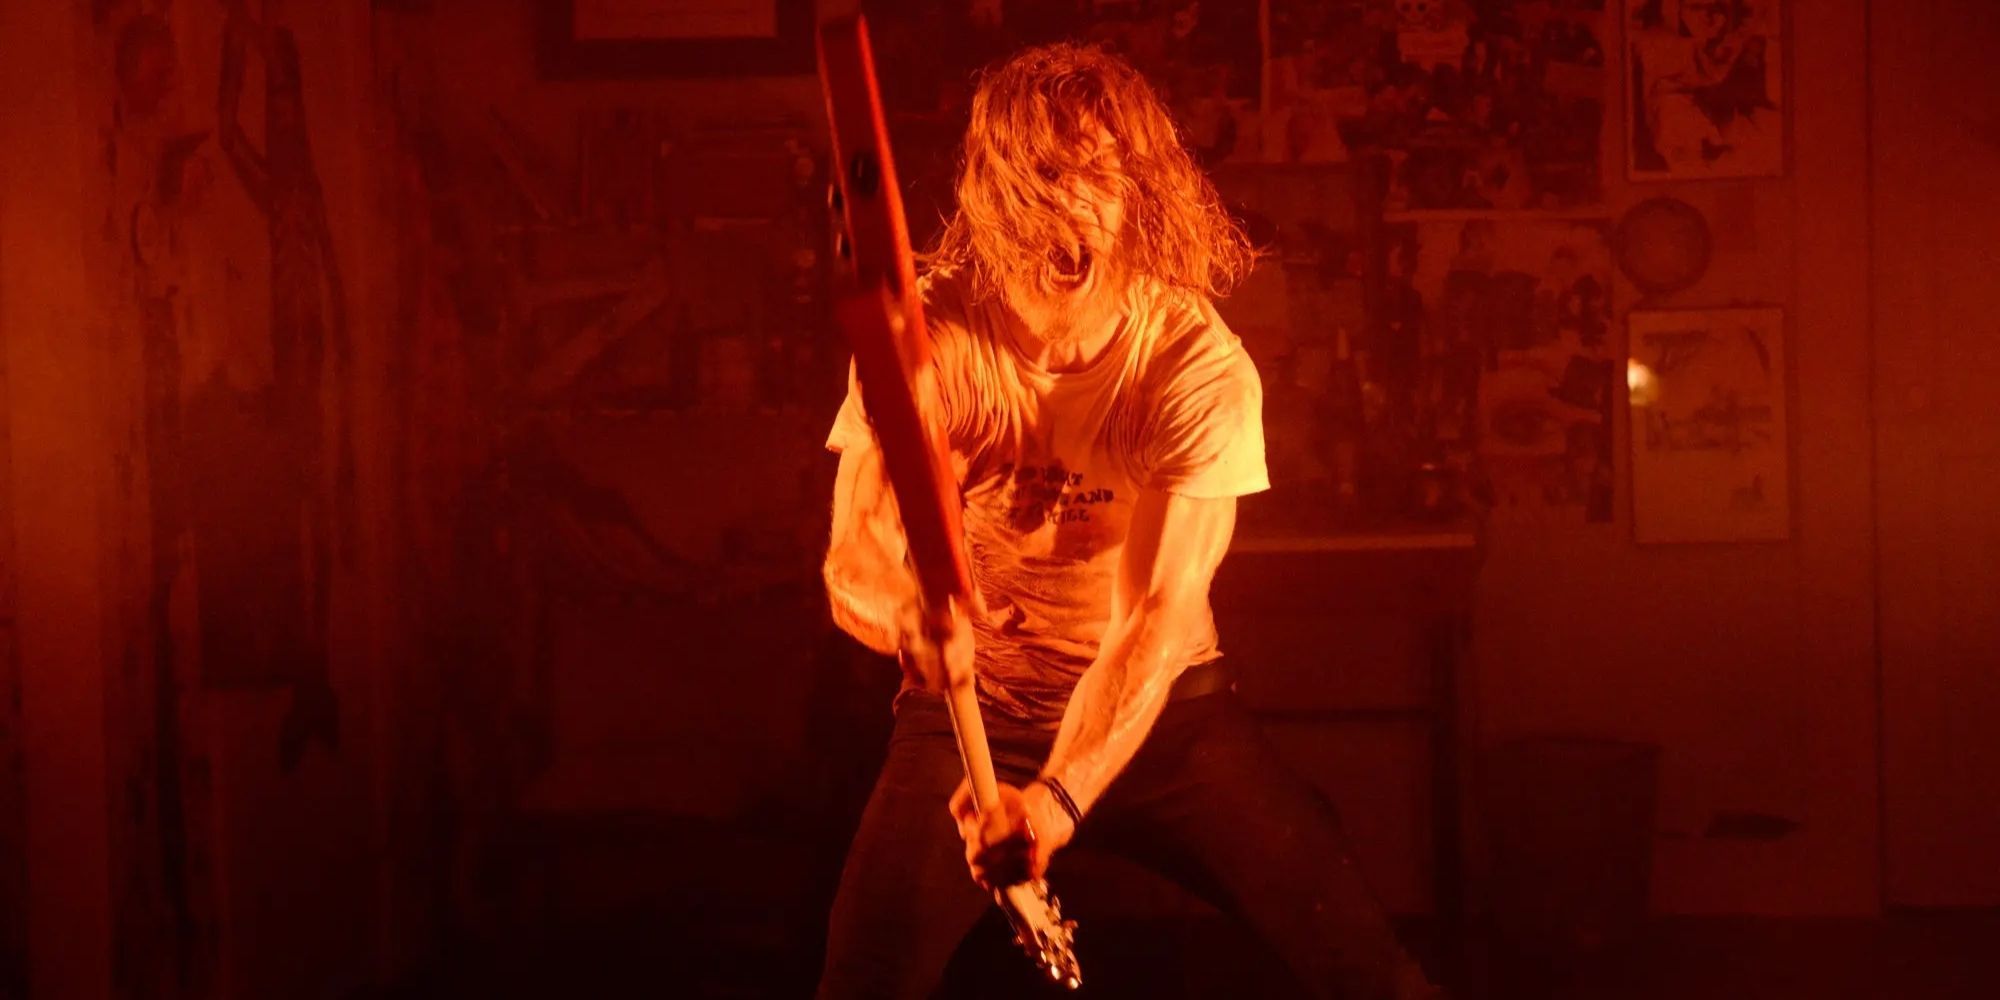 Ethan Embry wielding a guitar like an axe in The Devil's Candy